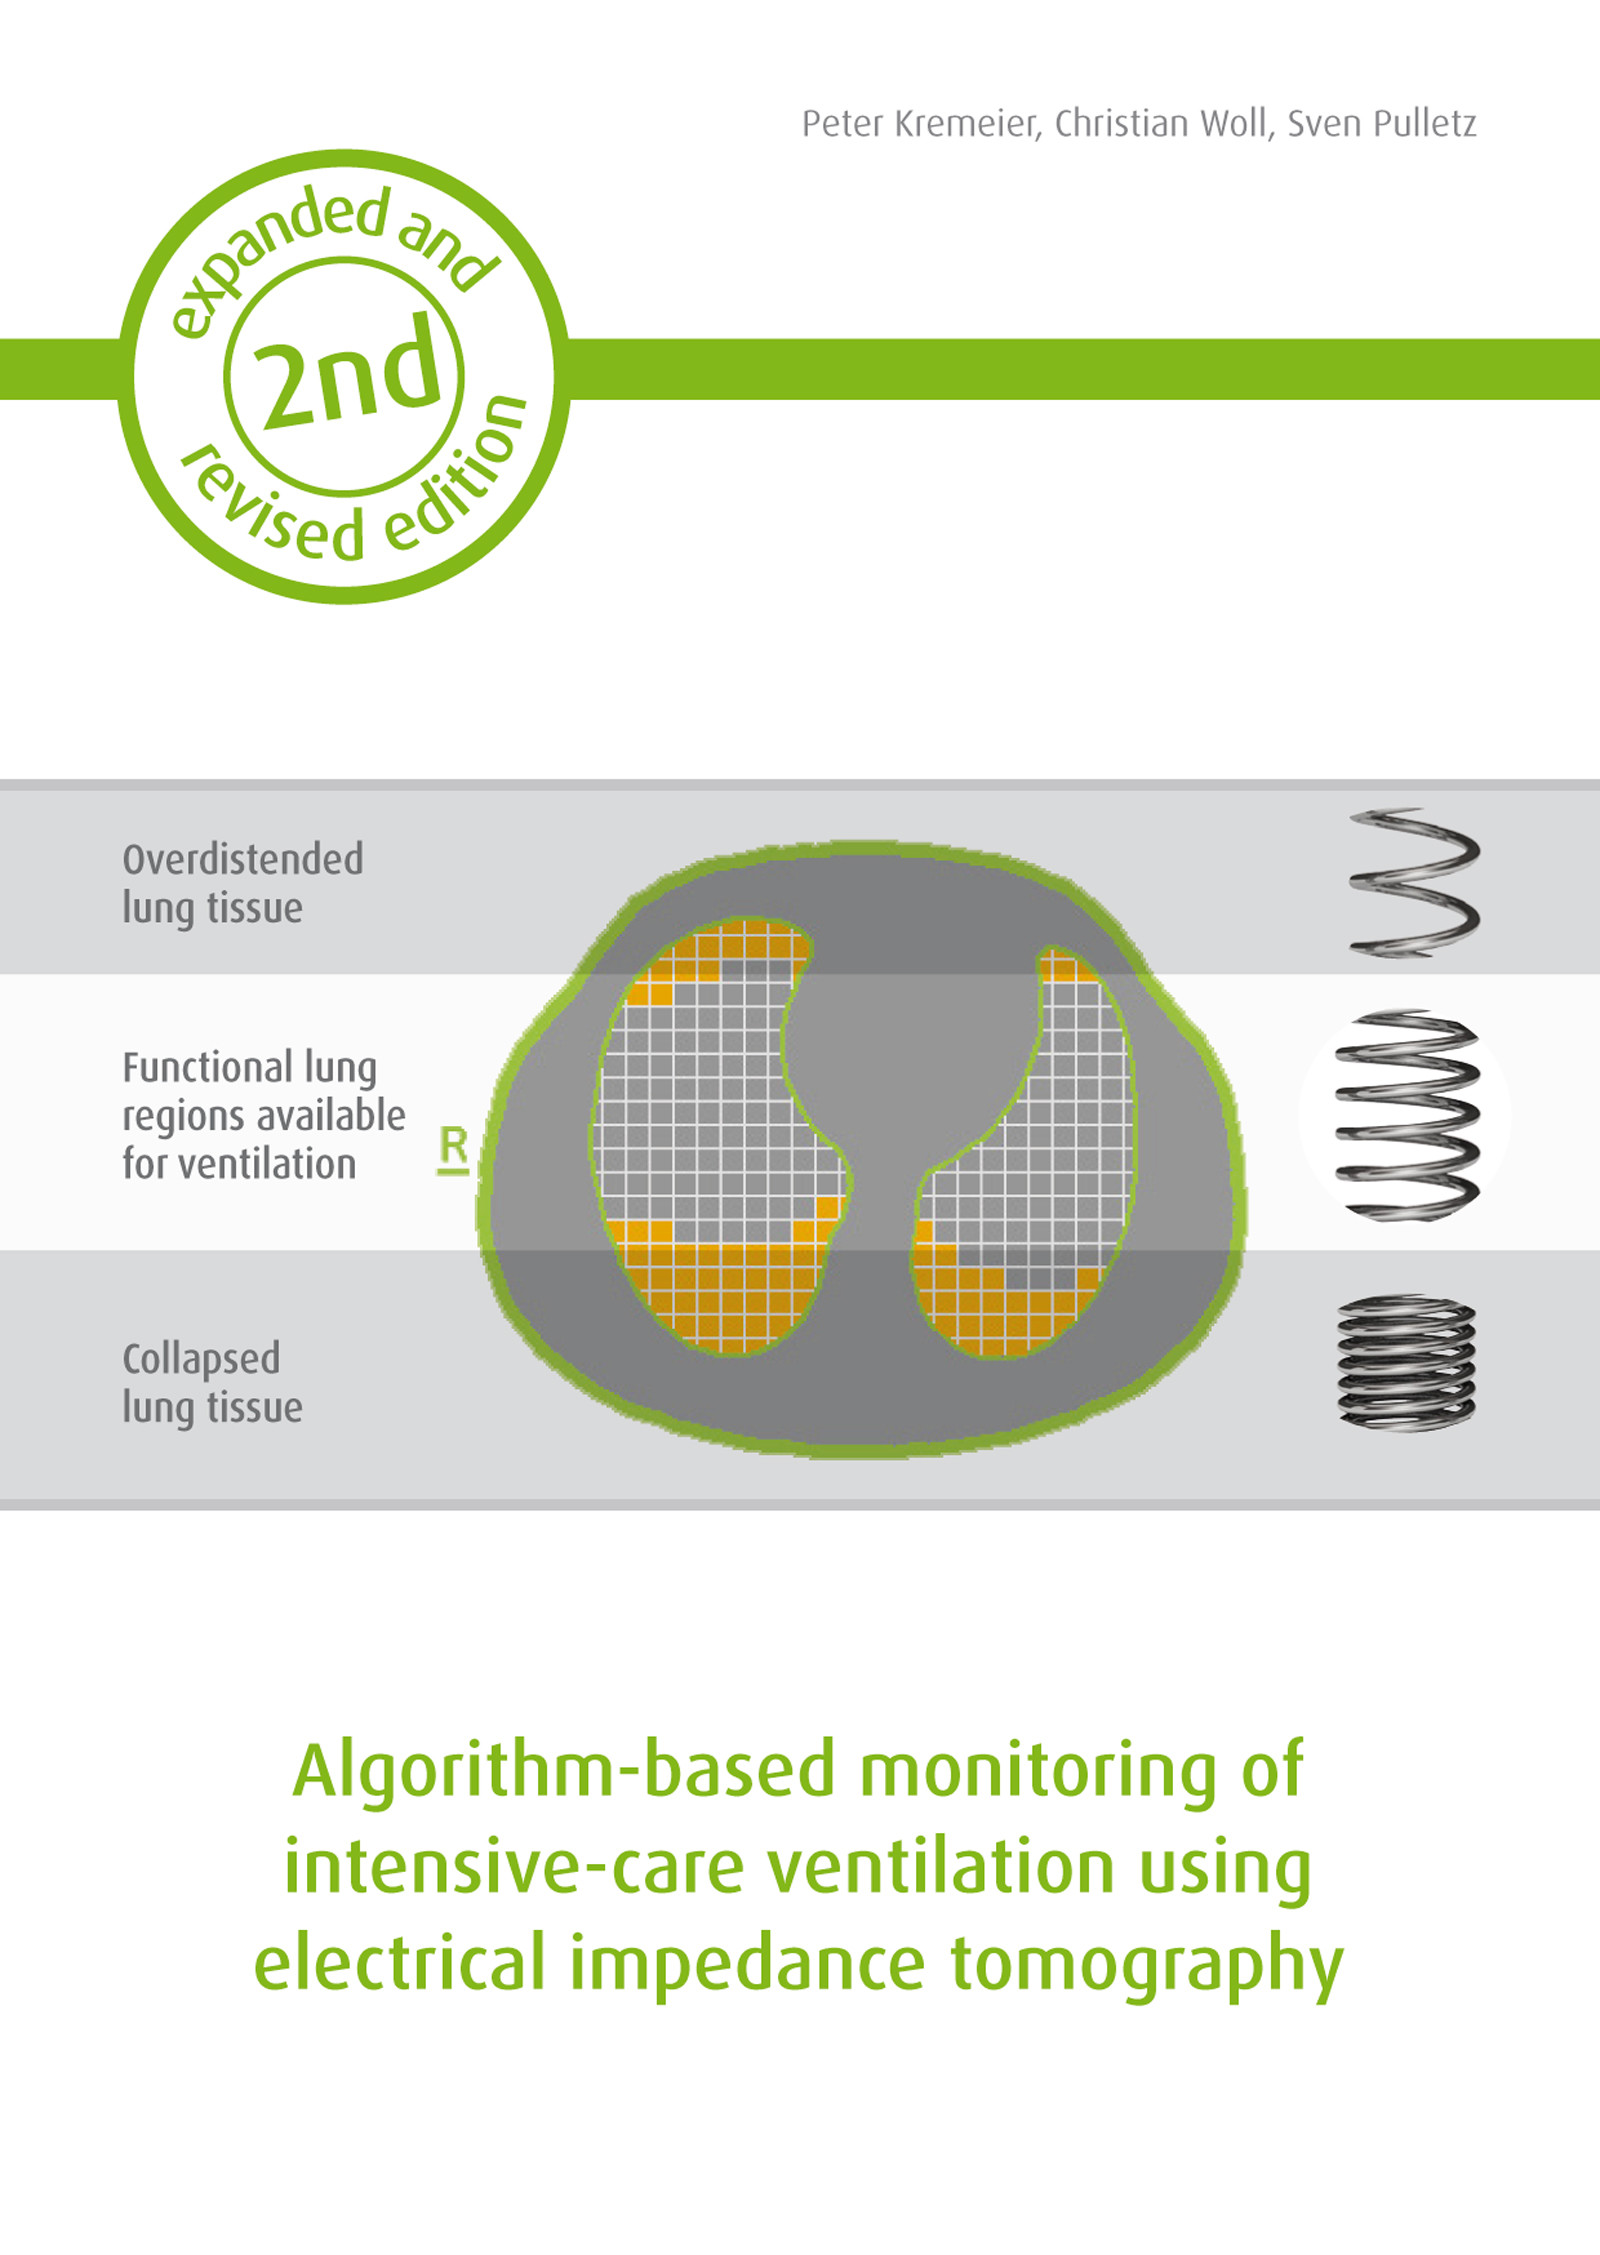 Algorithm-based monitoring of intensive-care ventilation using electrical impedance tomography